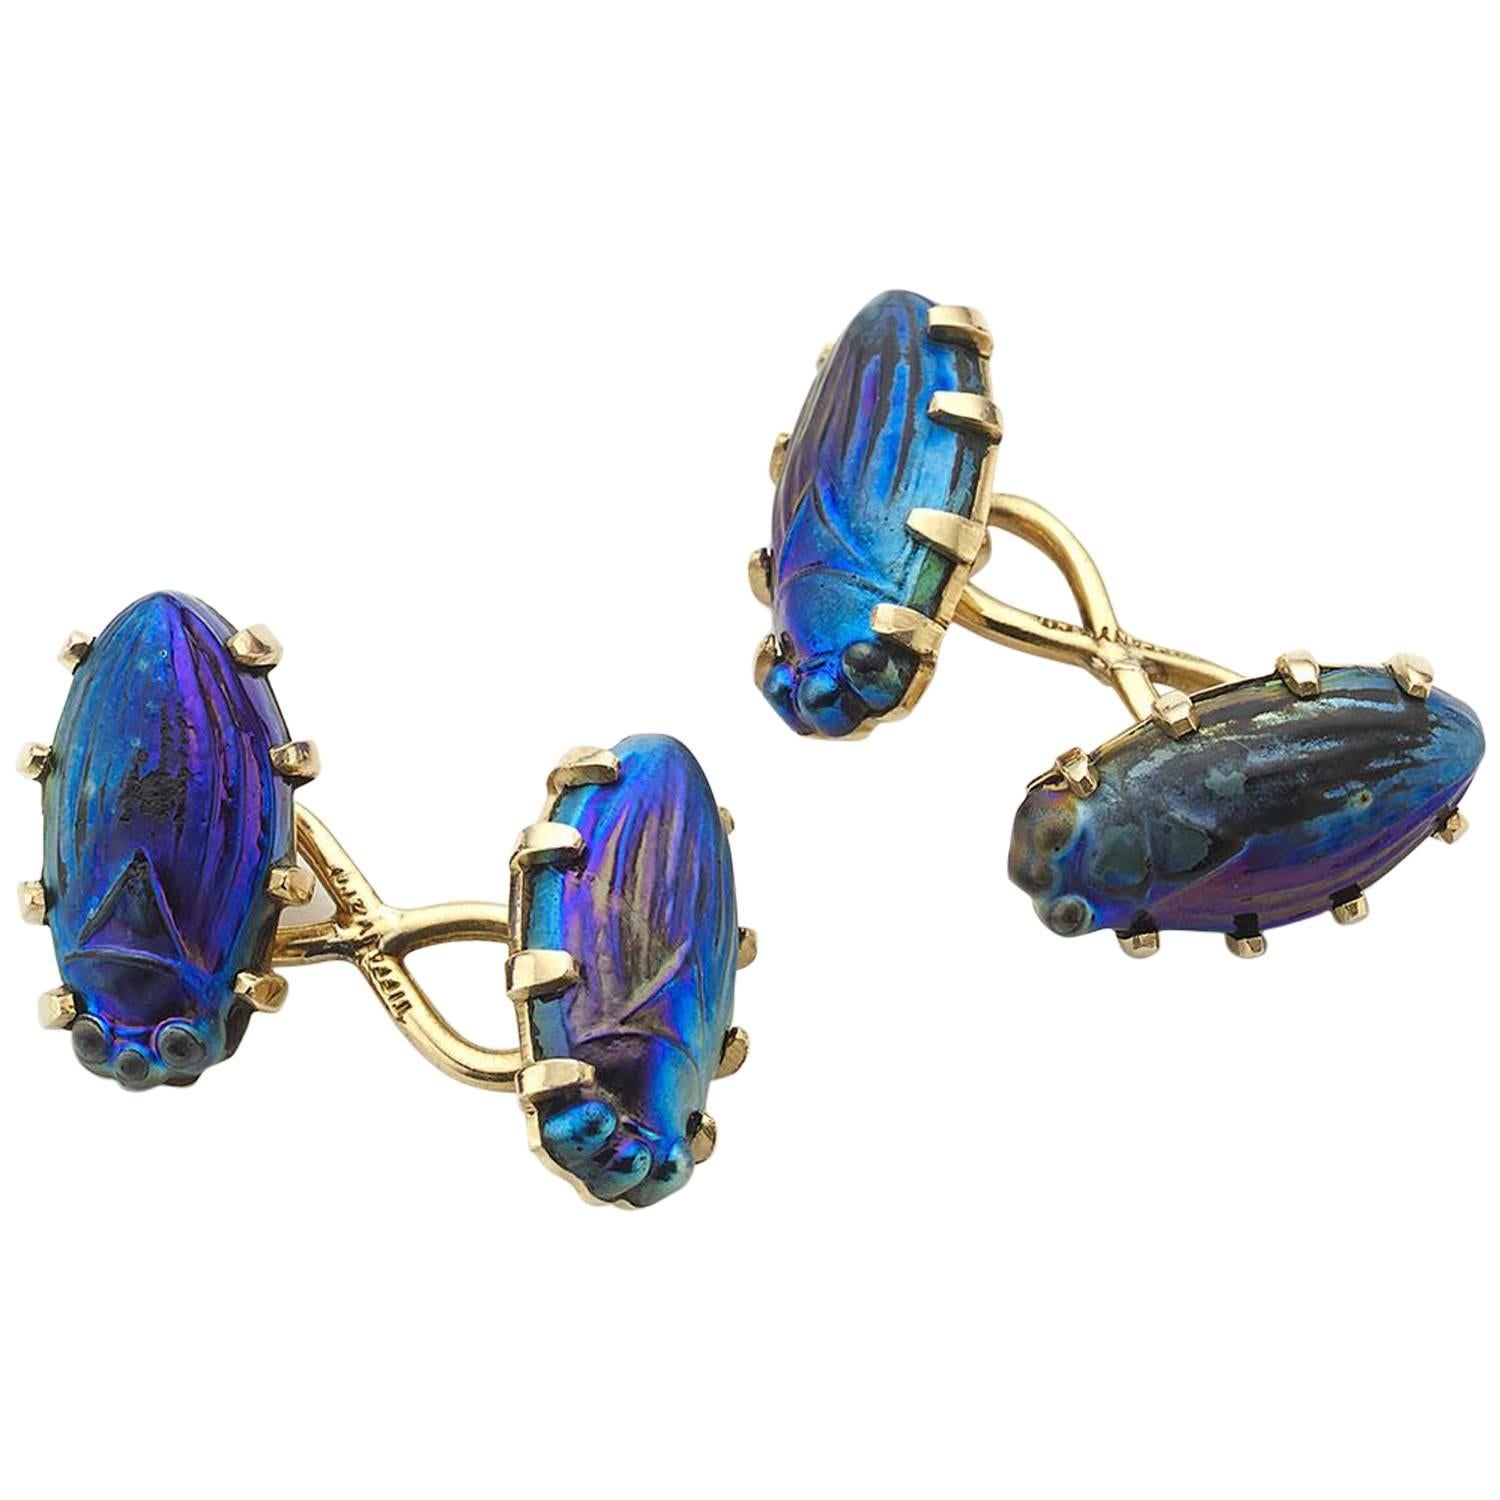 Tiffany & Co. Iridescent Glass Scarab and Gold Cufflinks